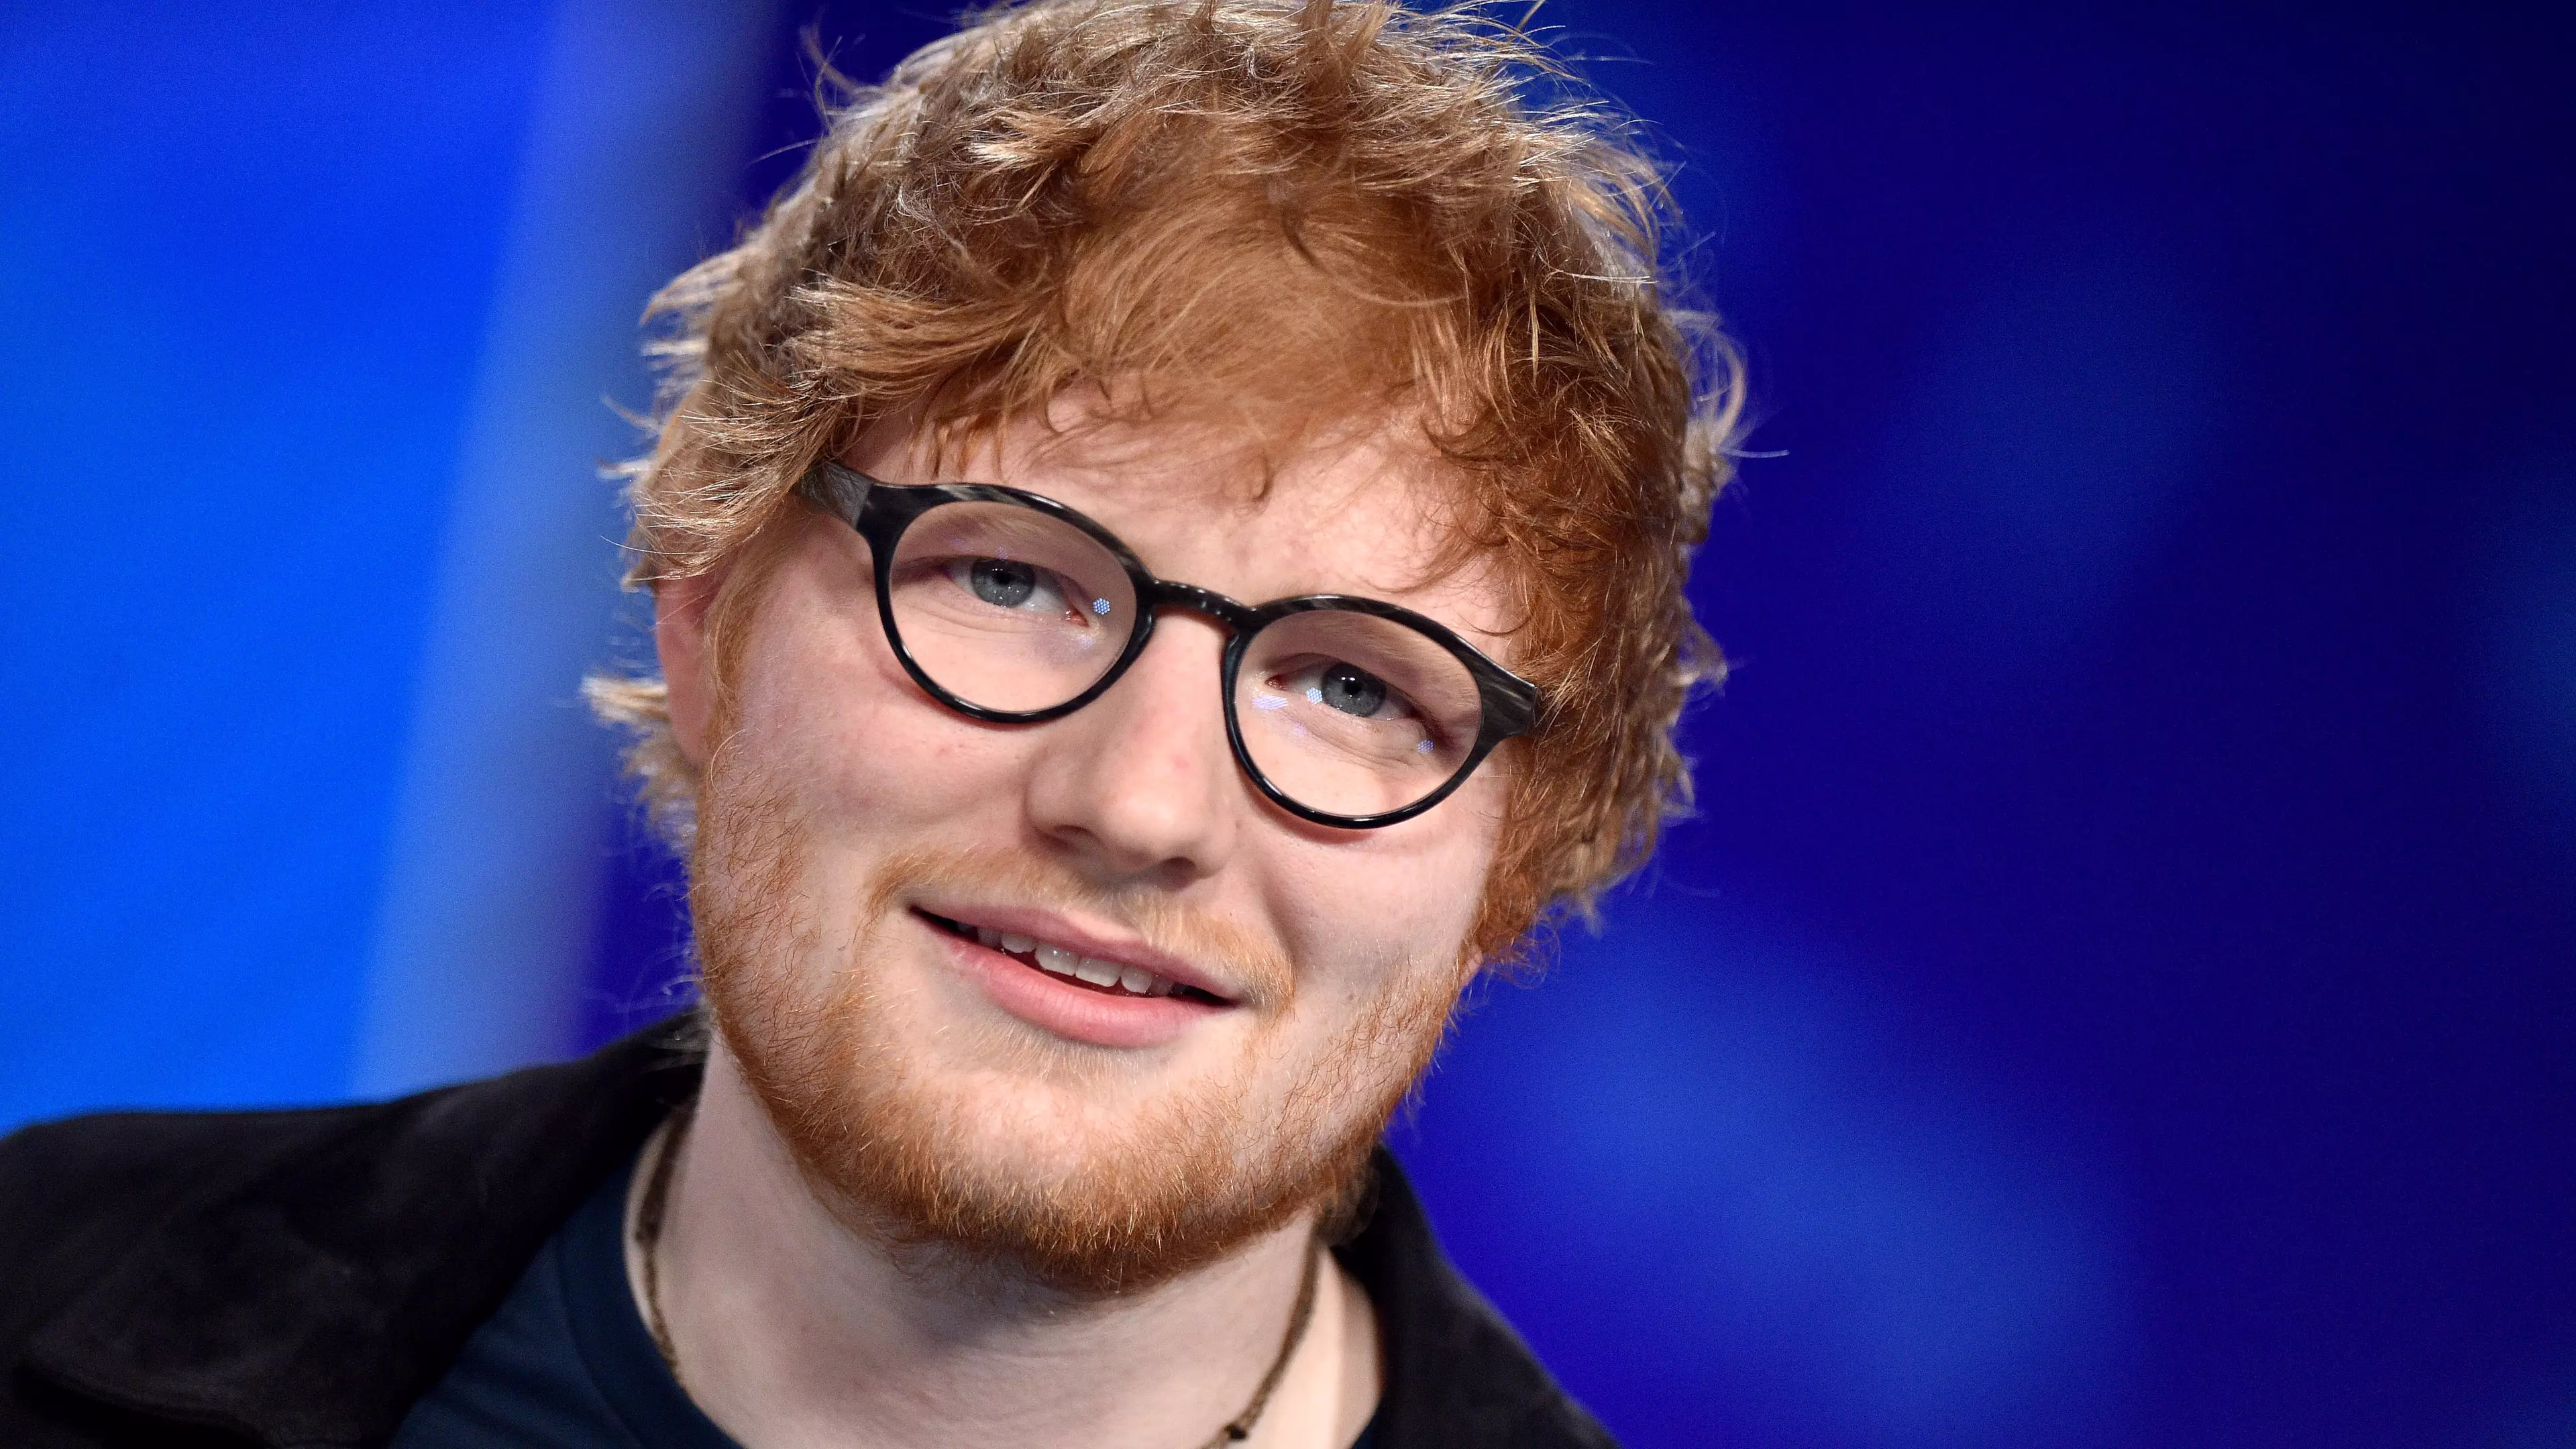 Ed Sheeran Reveals His Year Off Was To Deal Substance Abuse Issues